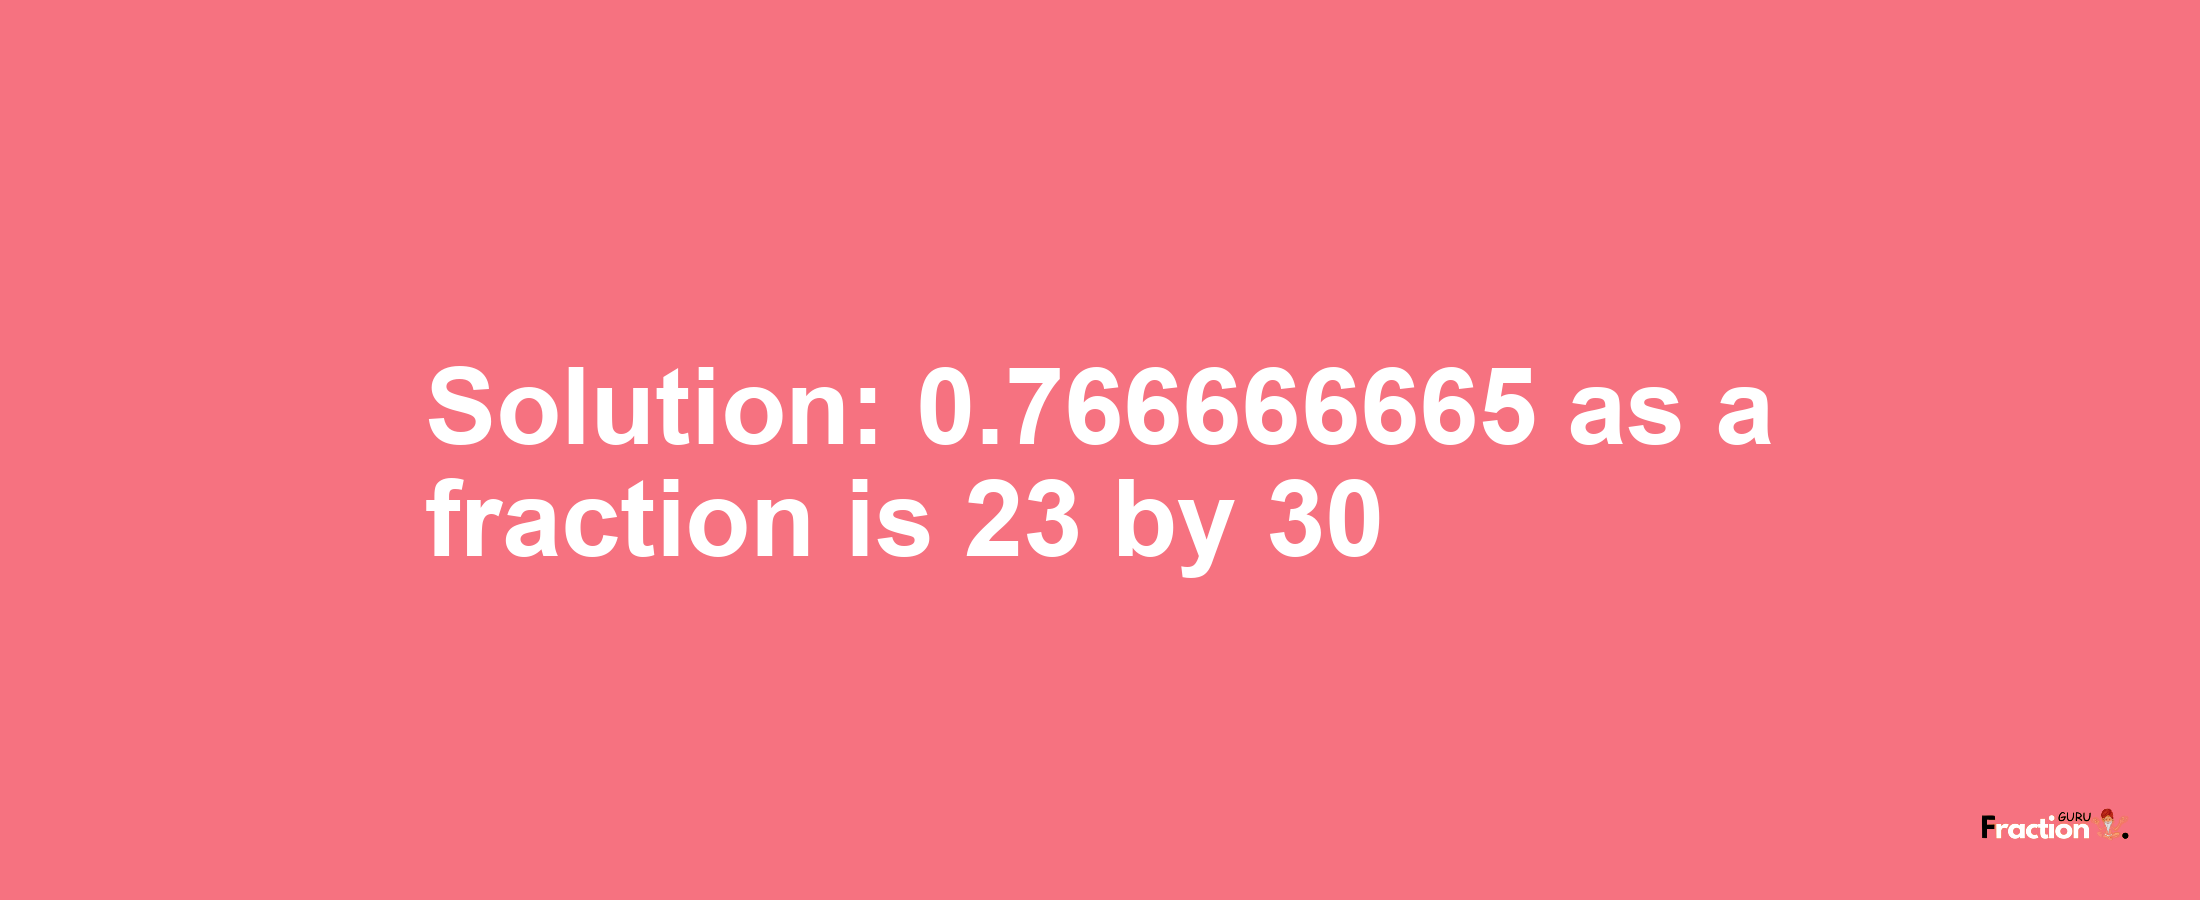 Solution:0.766666665 as a fraction is 23/30